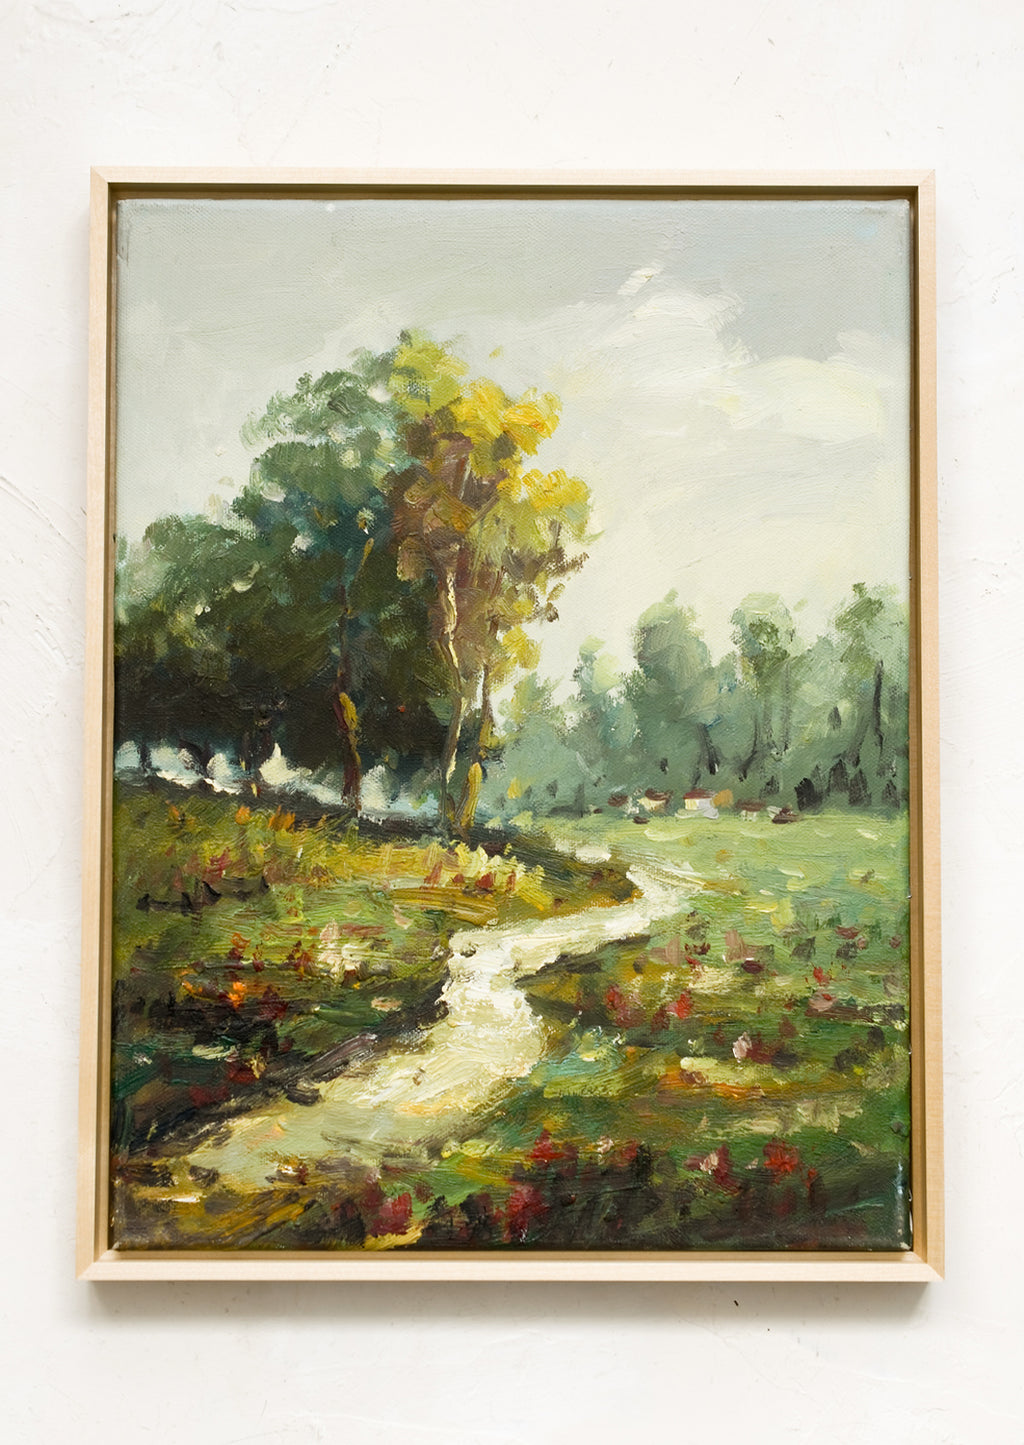 1: A framed landscape oil painting of a path running through a flowery meadow.